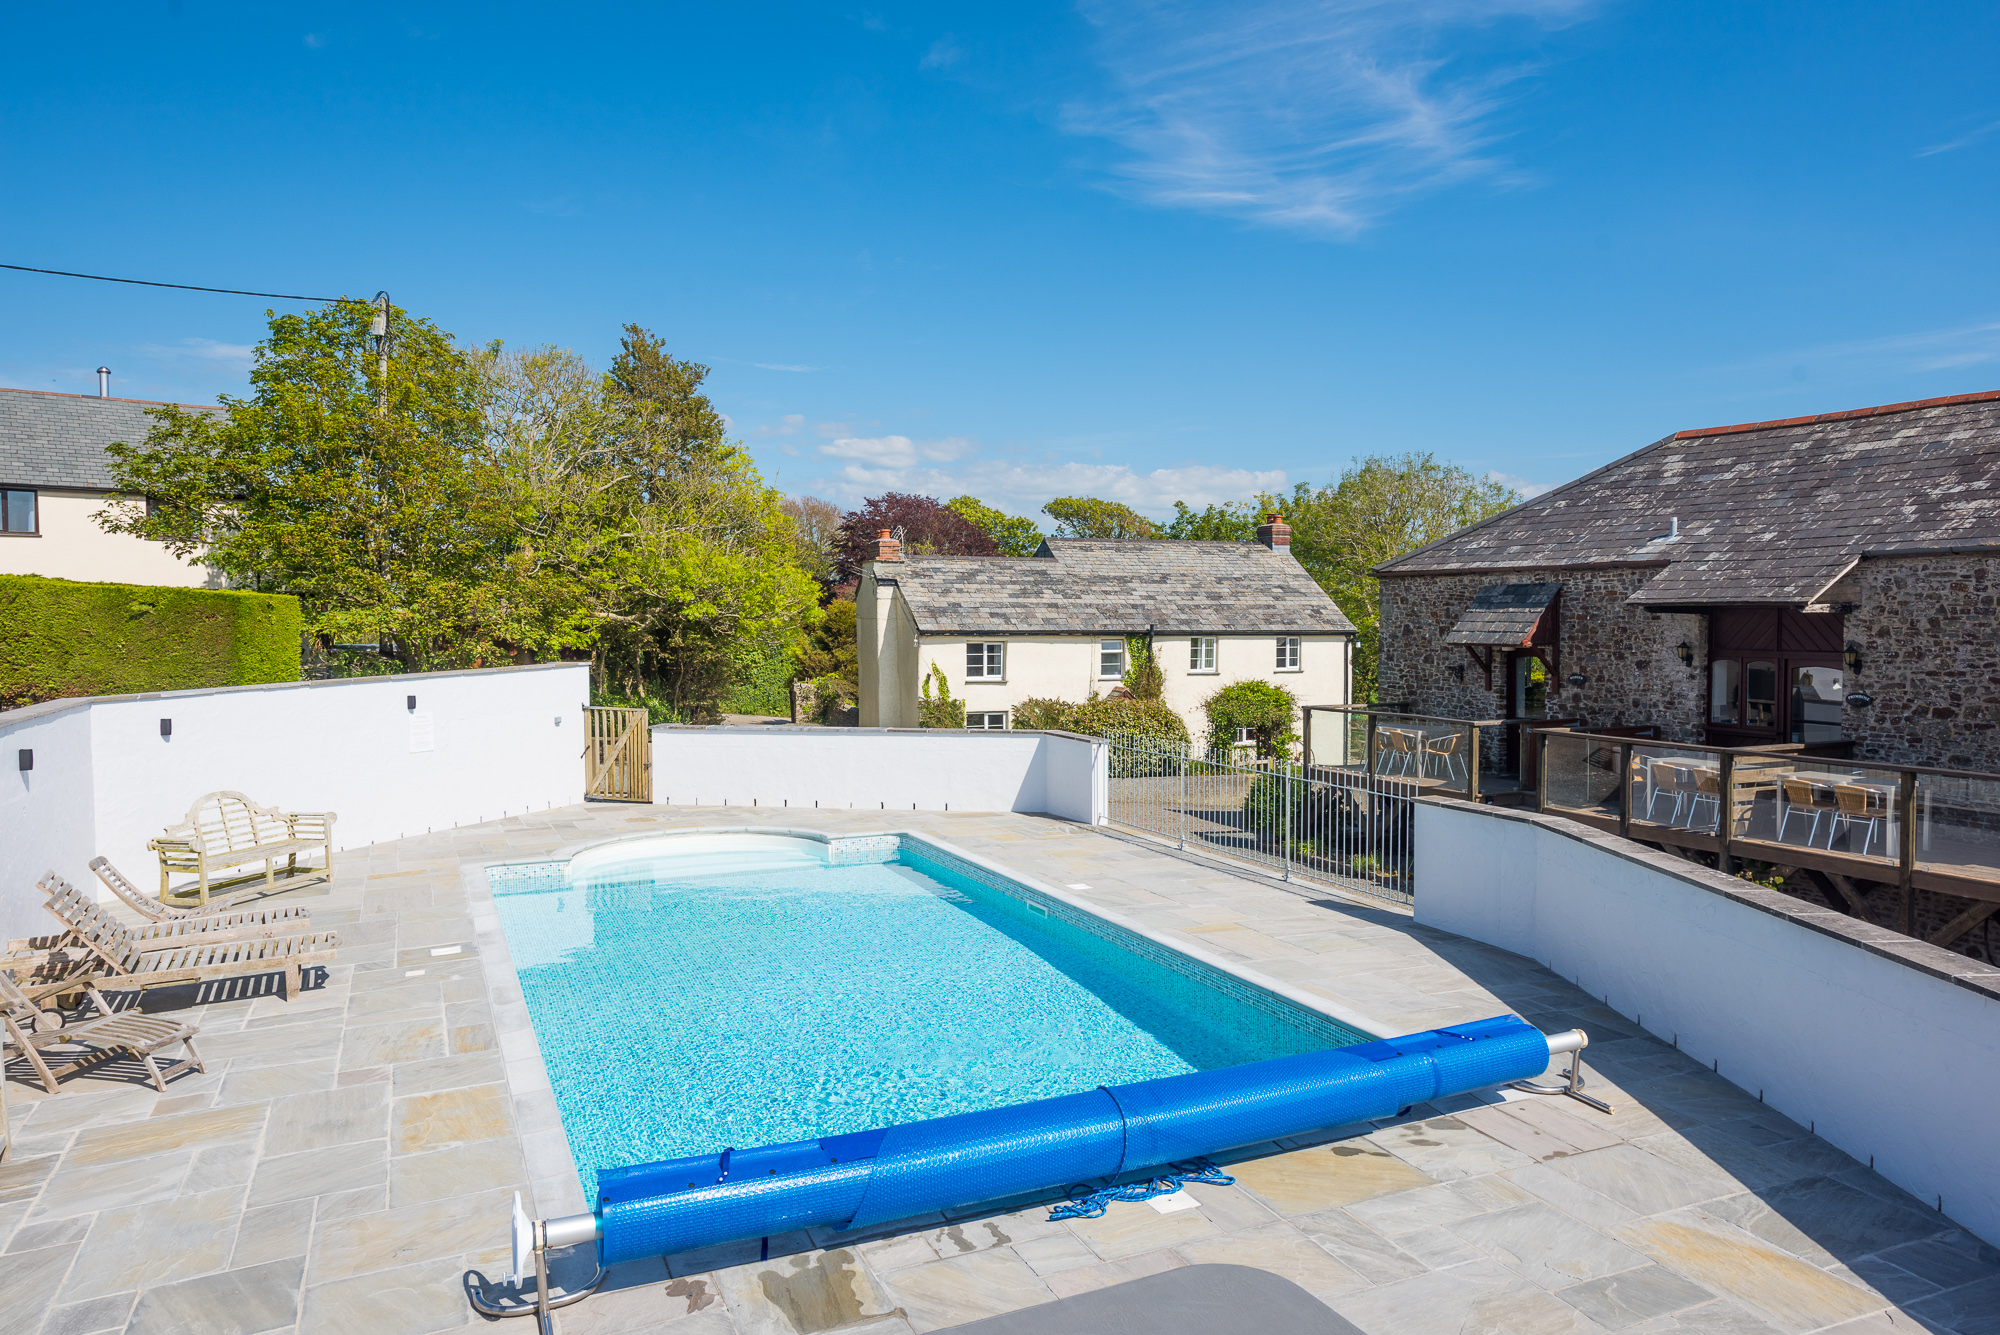 Outdoor heated pool with the Farmhouse in the background.